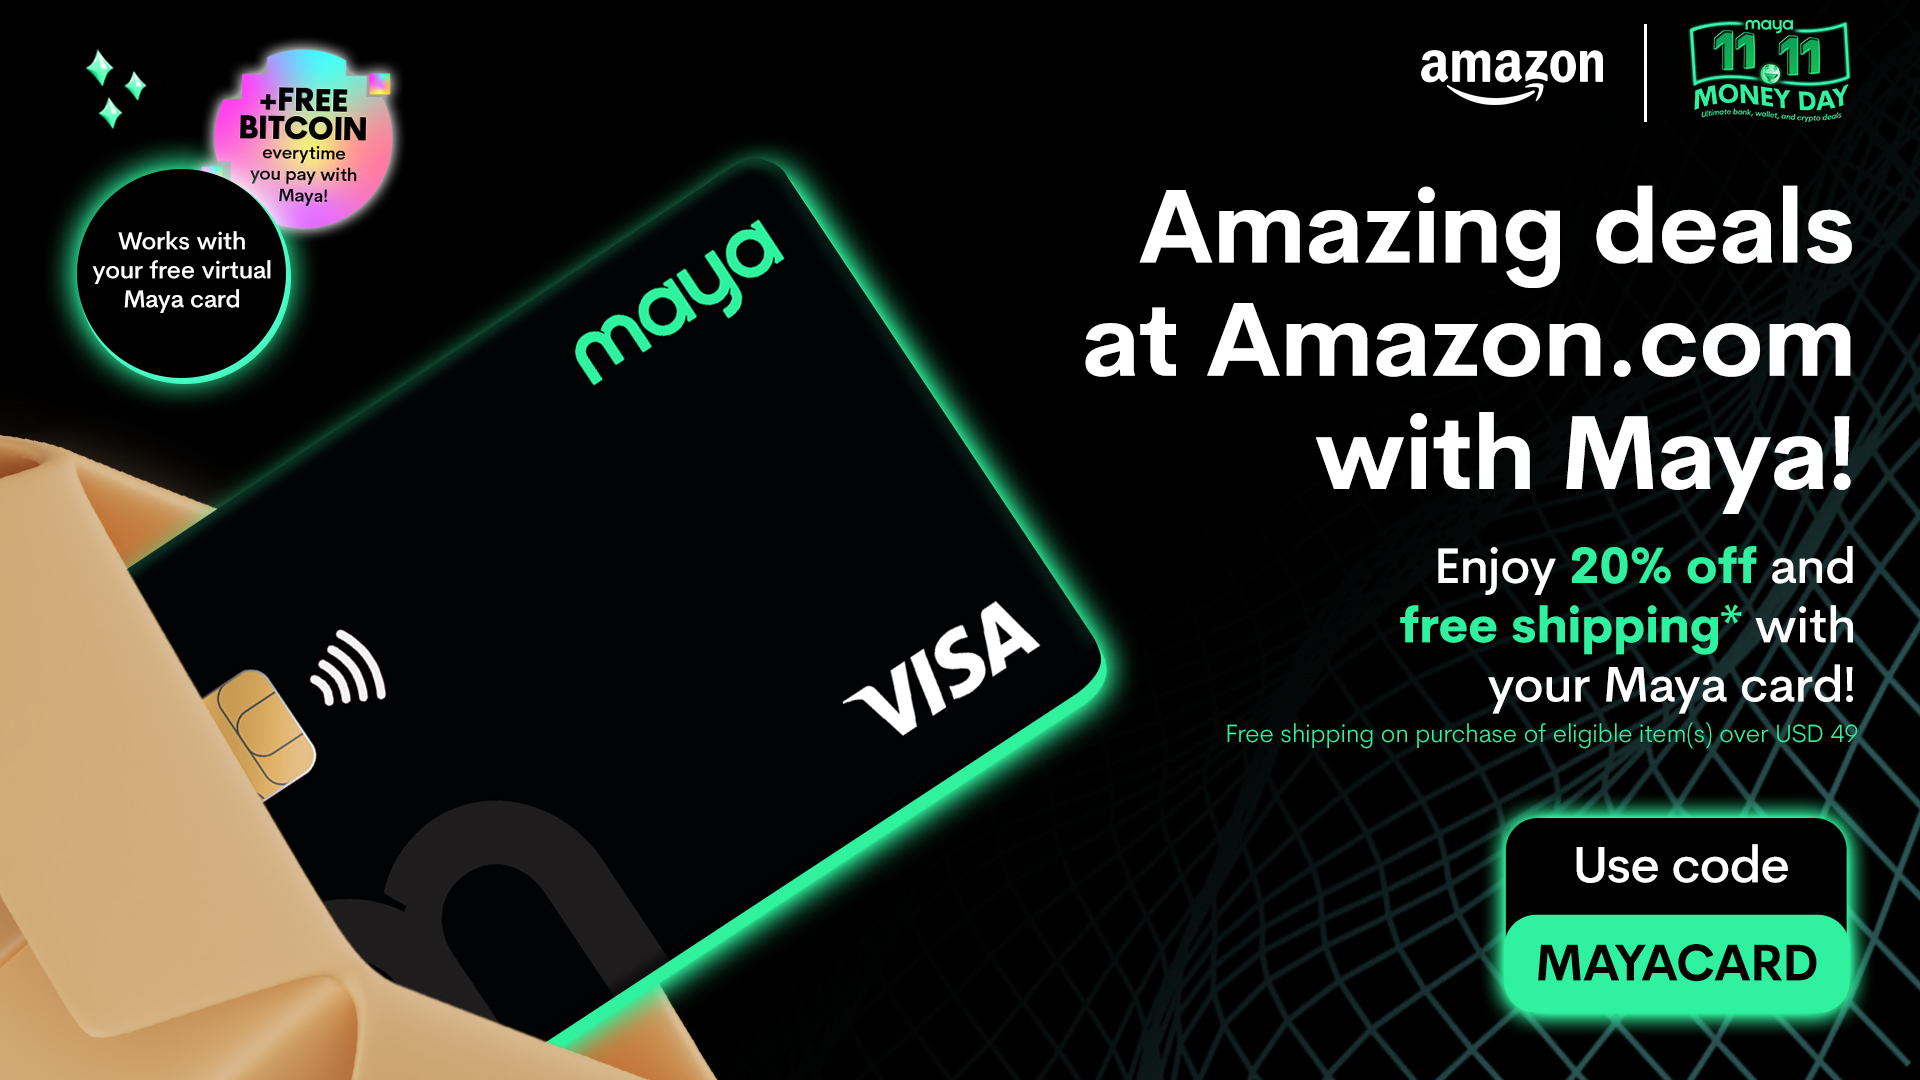 Get 20% OFF and FREE shipping on Amazon.com with your Maya card!